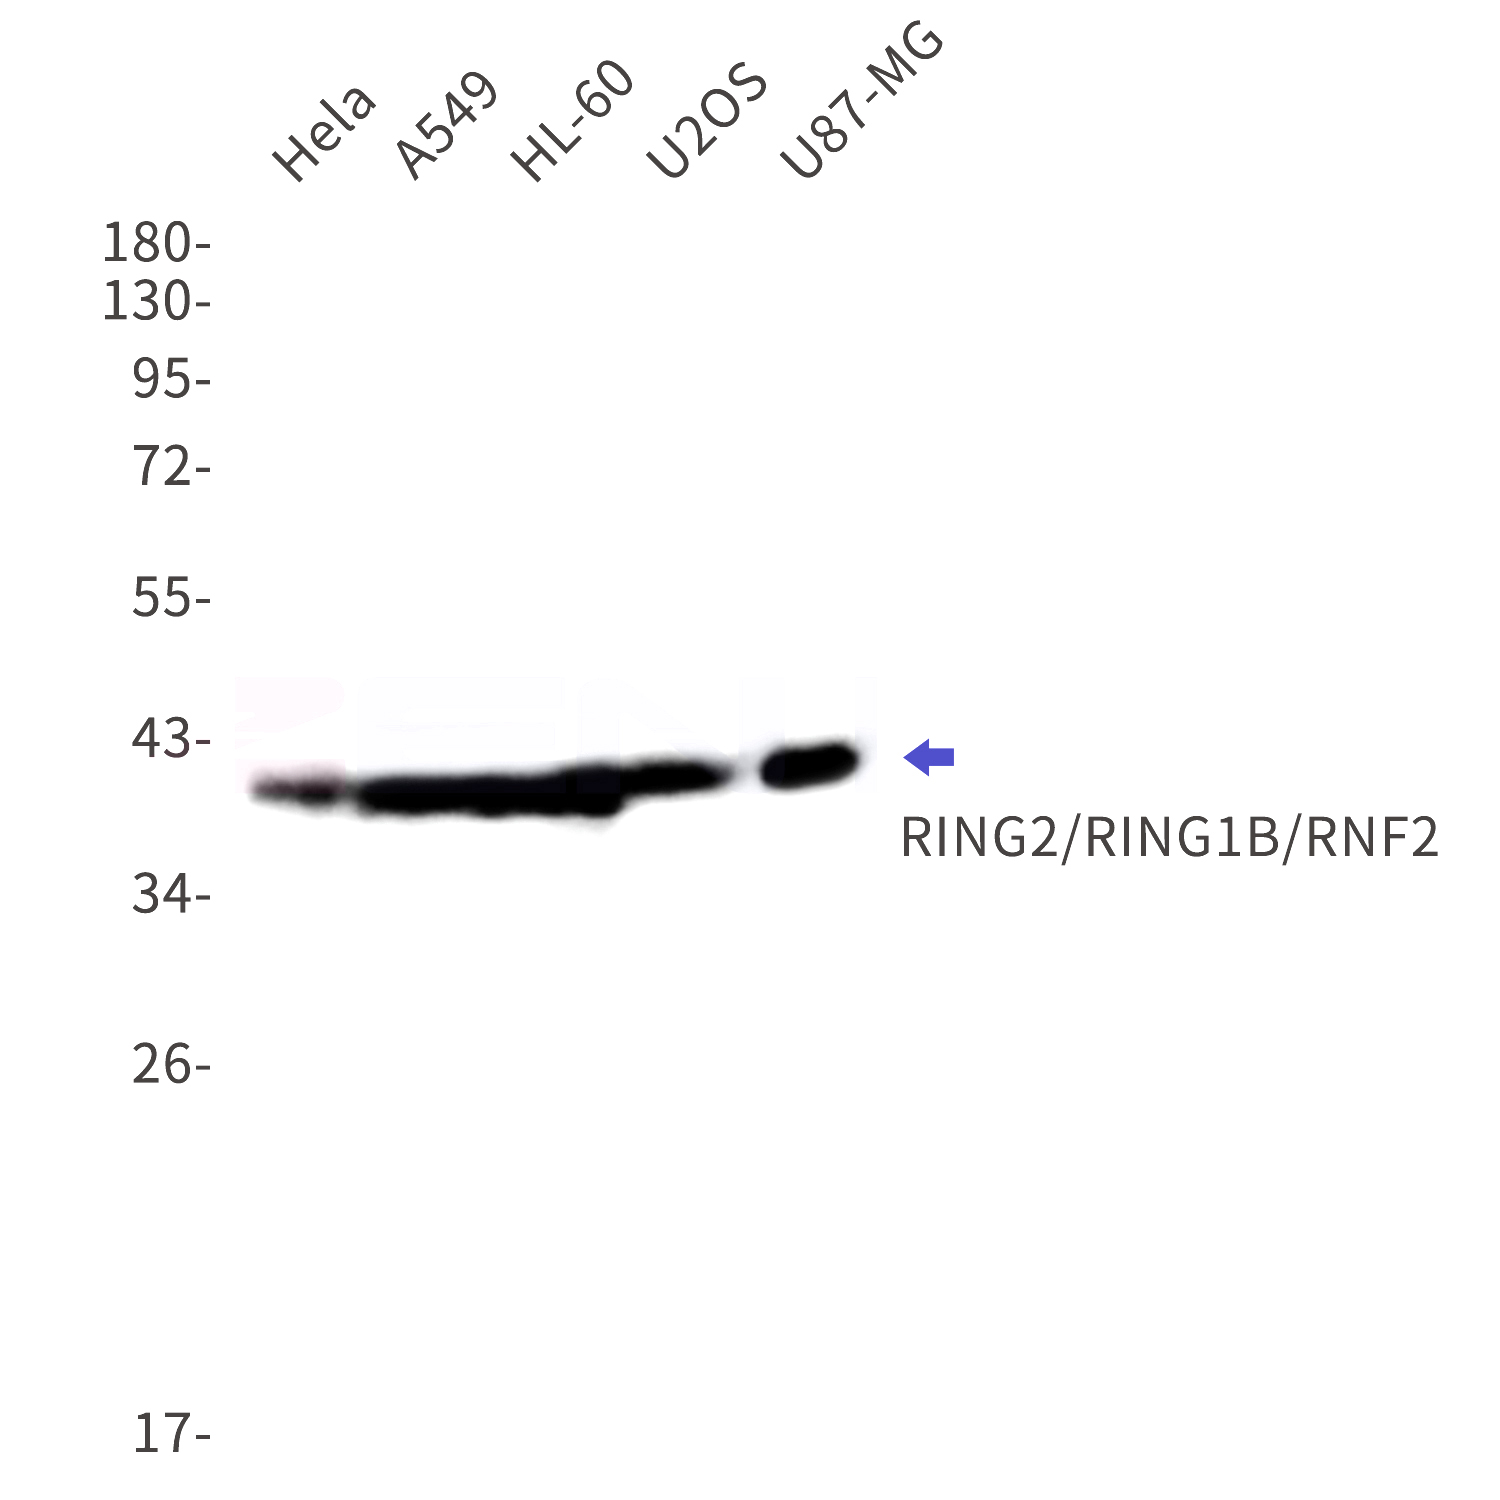 Western blot detection of RING2/RING1B/RNF2 in Hela,A549,HL-60,U2OS,U87-MG cell lysates using RING2/RING1B/RNF2 Rabbit mAb(1:1000 diluted).Observed band size:38kDa.